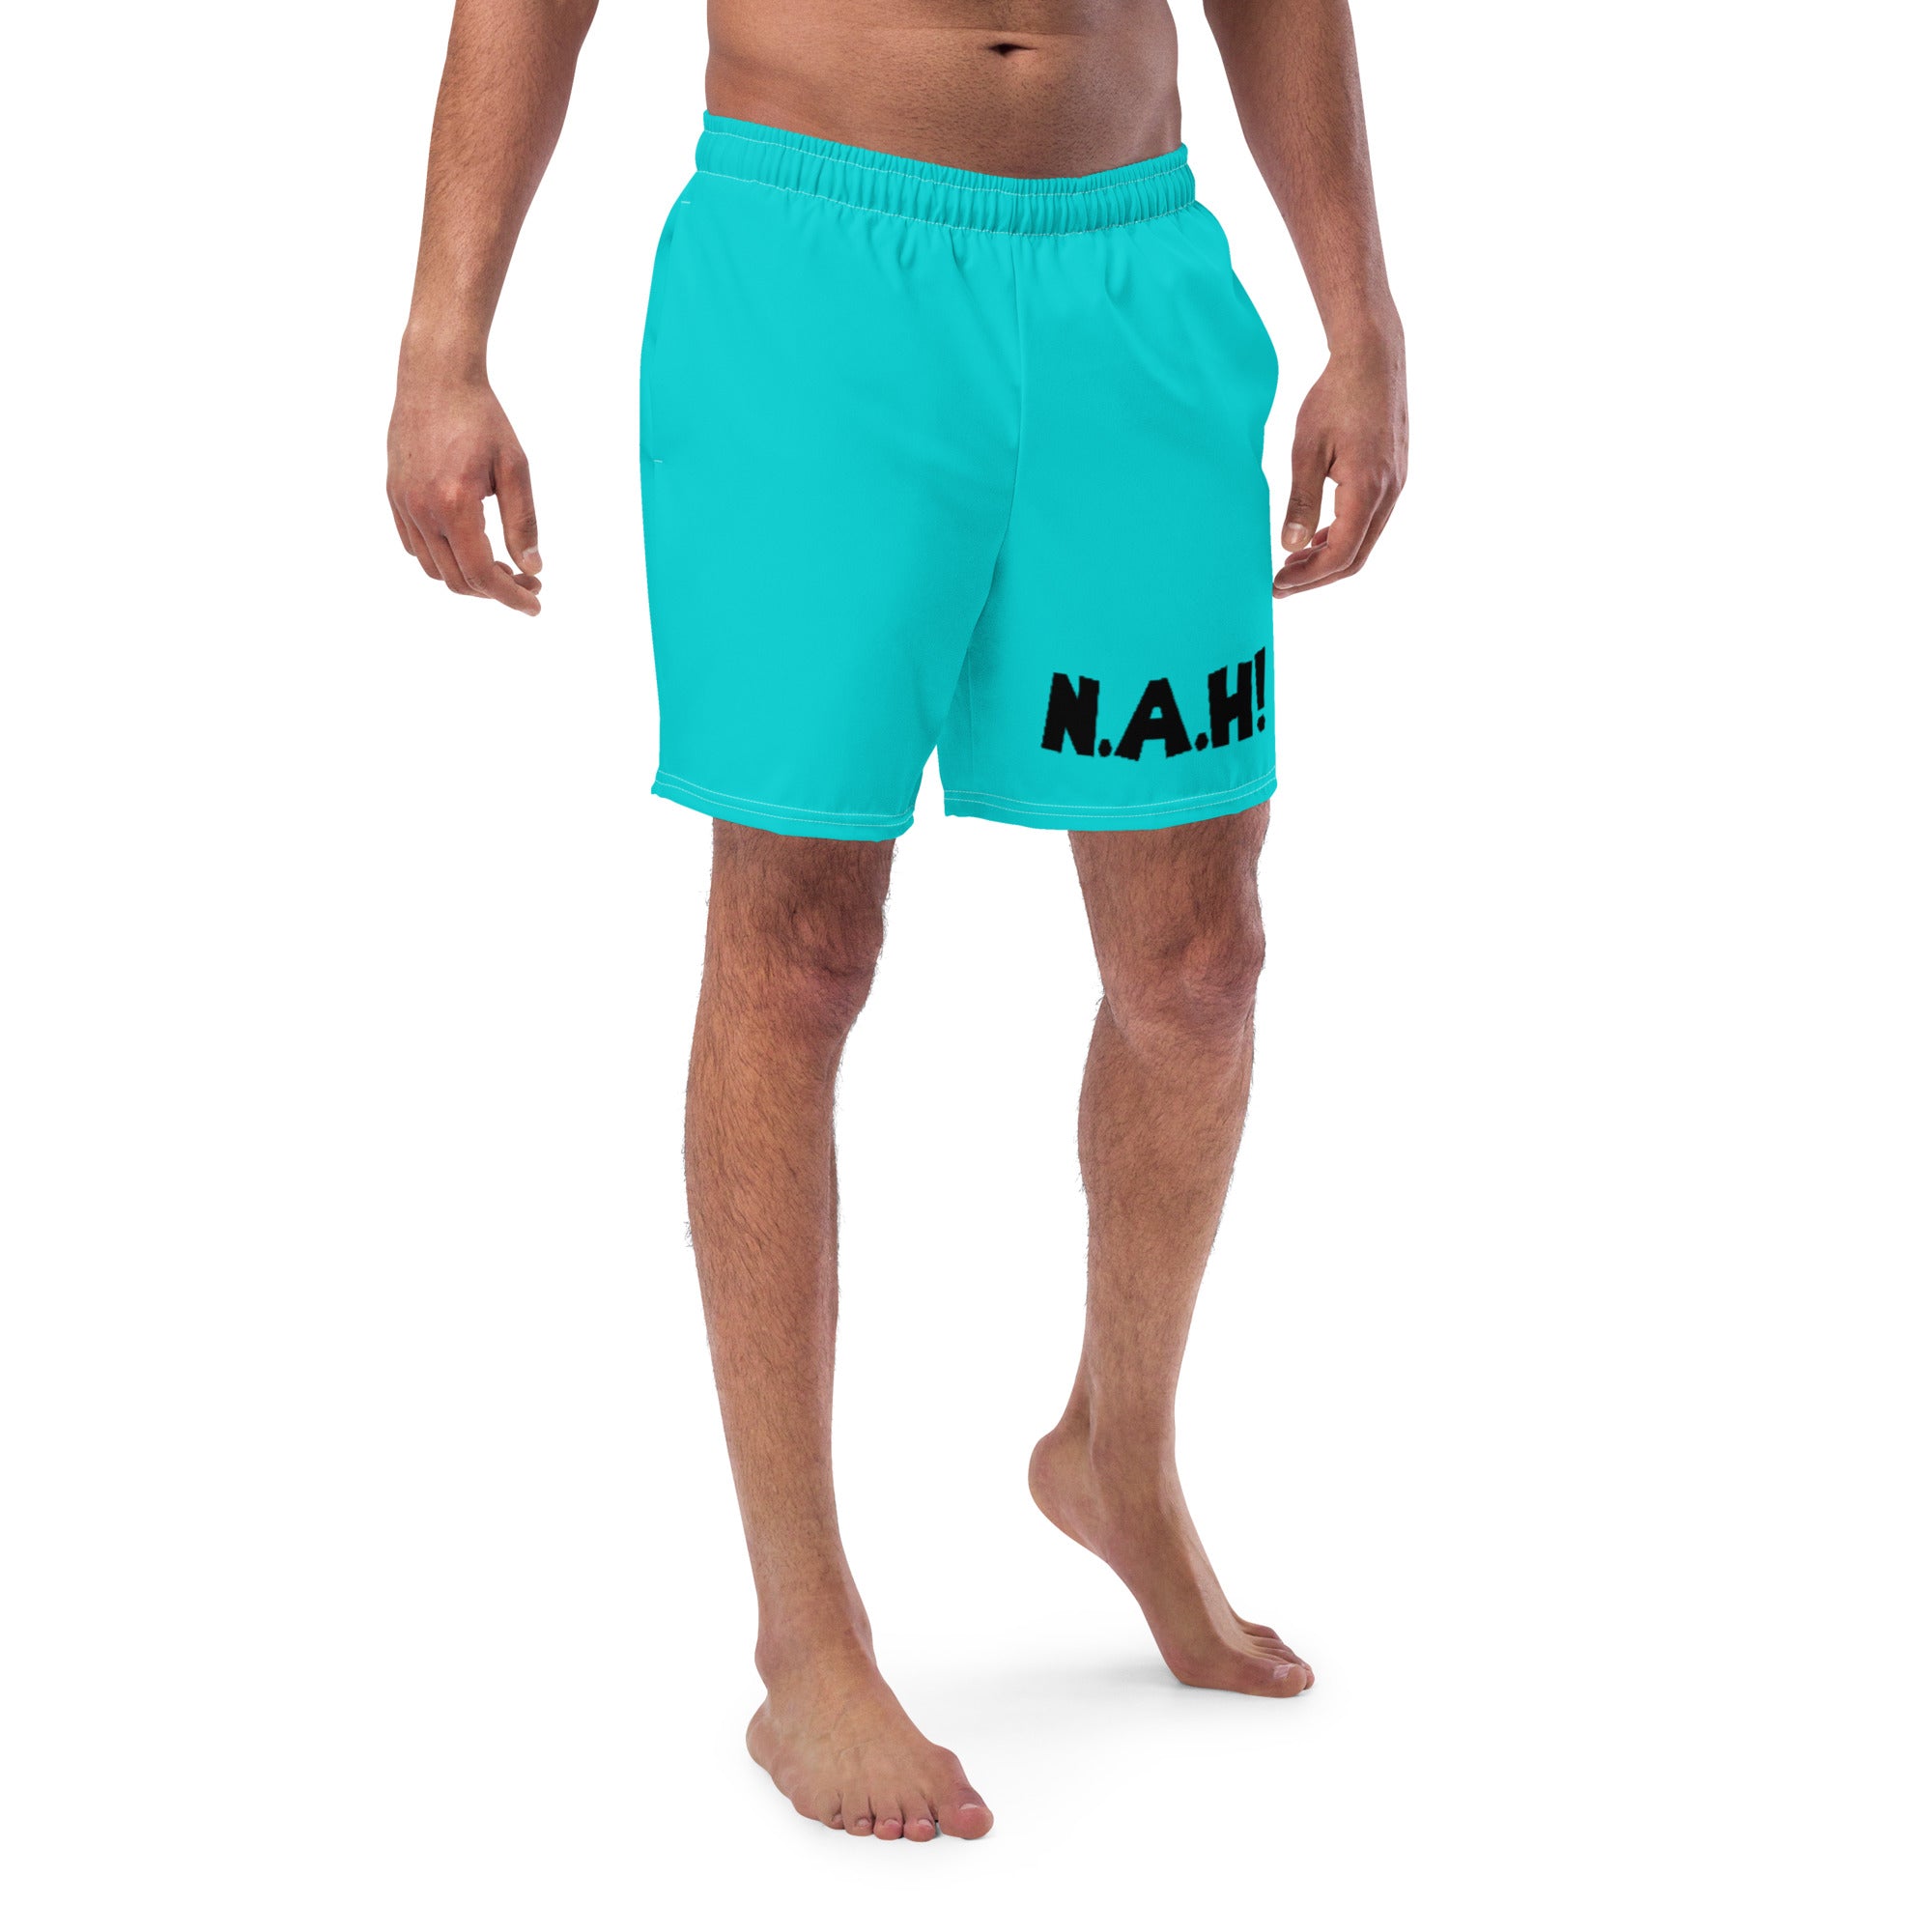 King's 'N.A.H!' Swim Trunks (Turquoise)